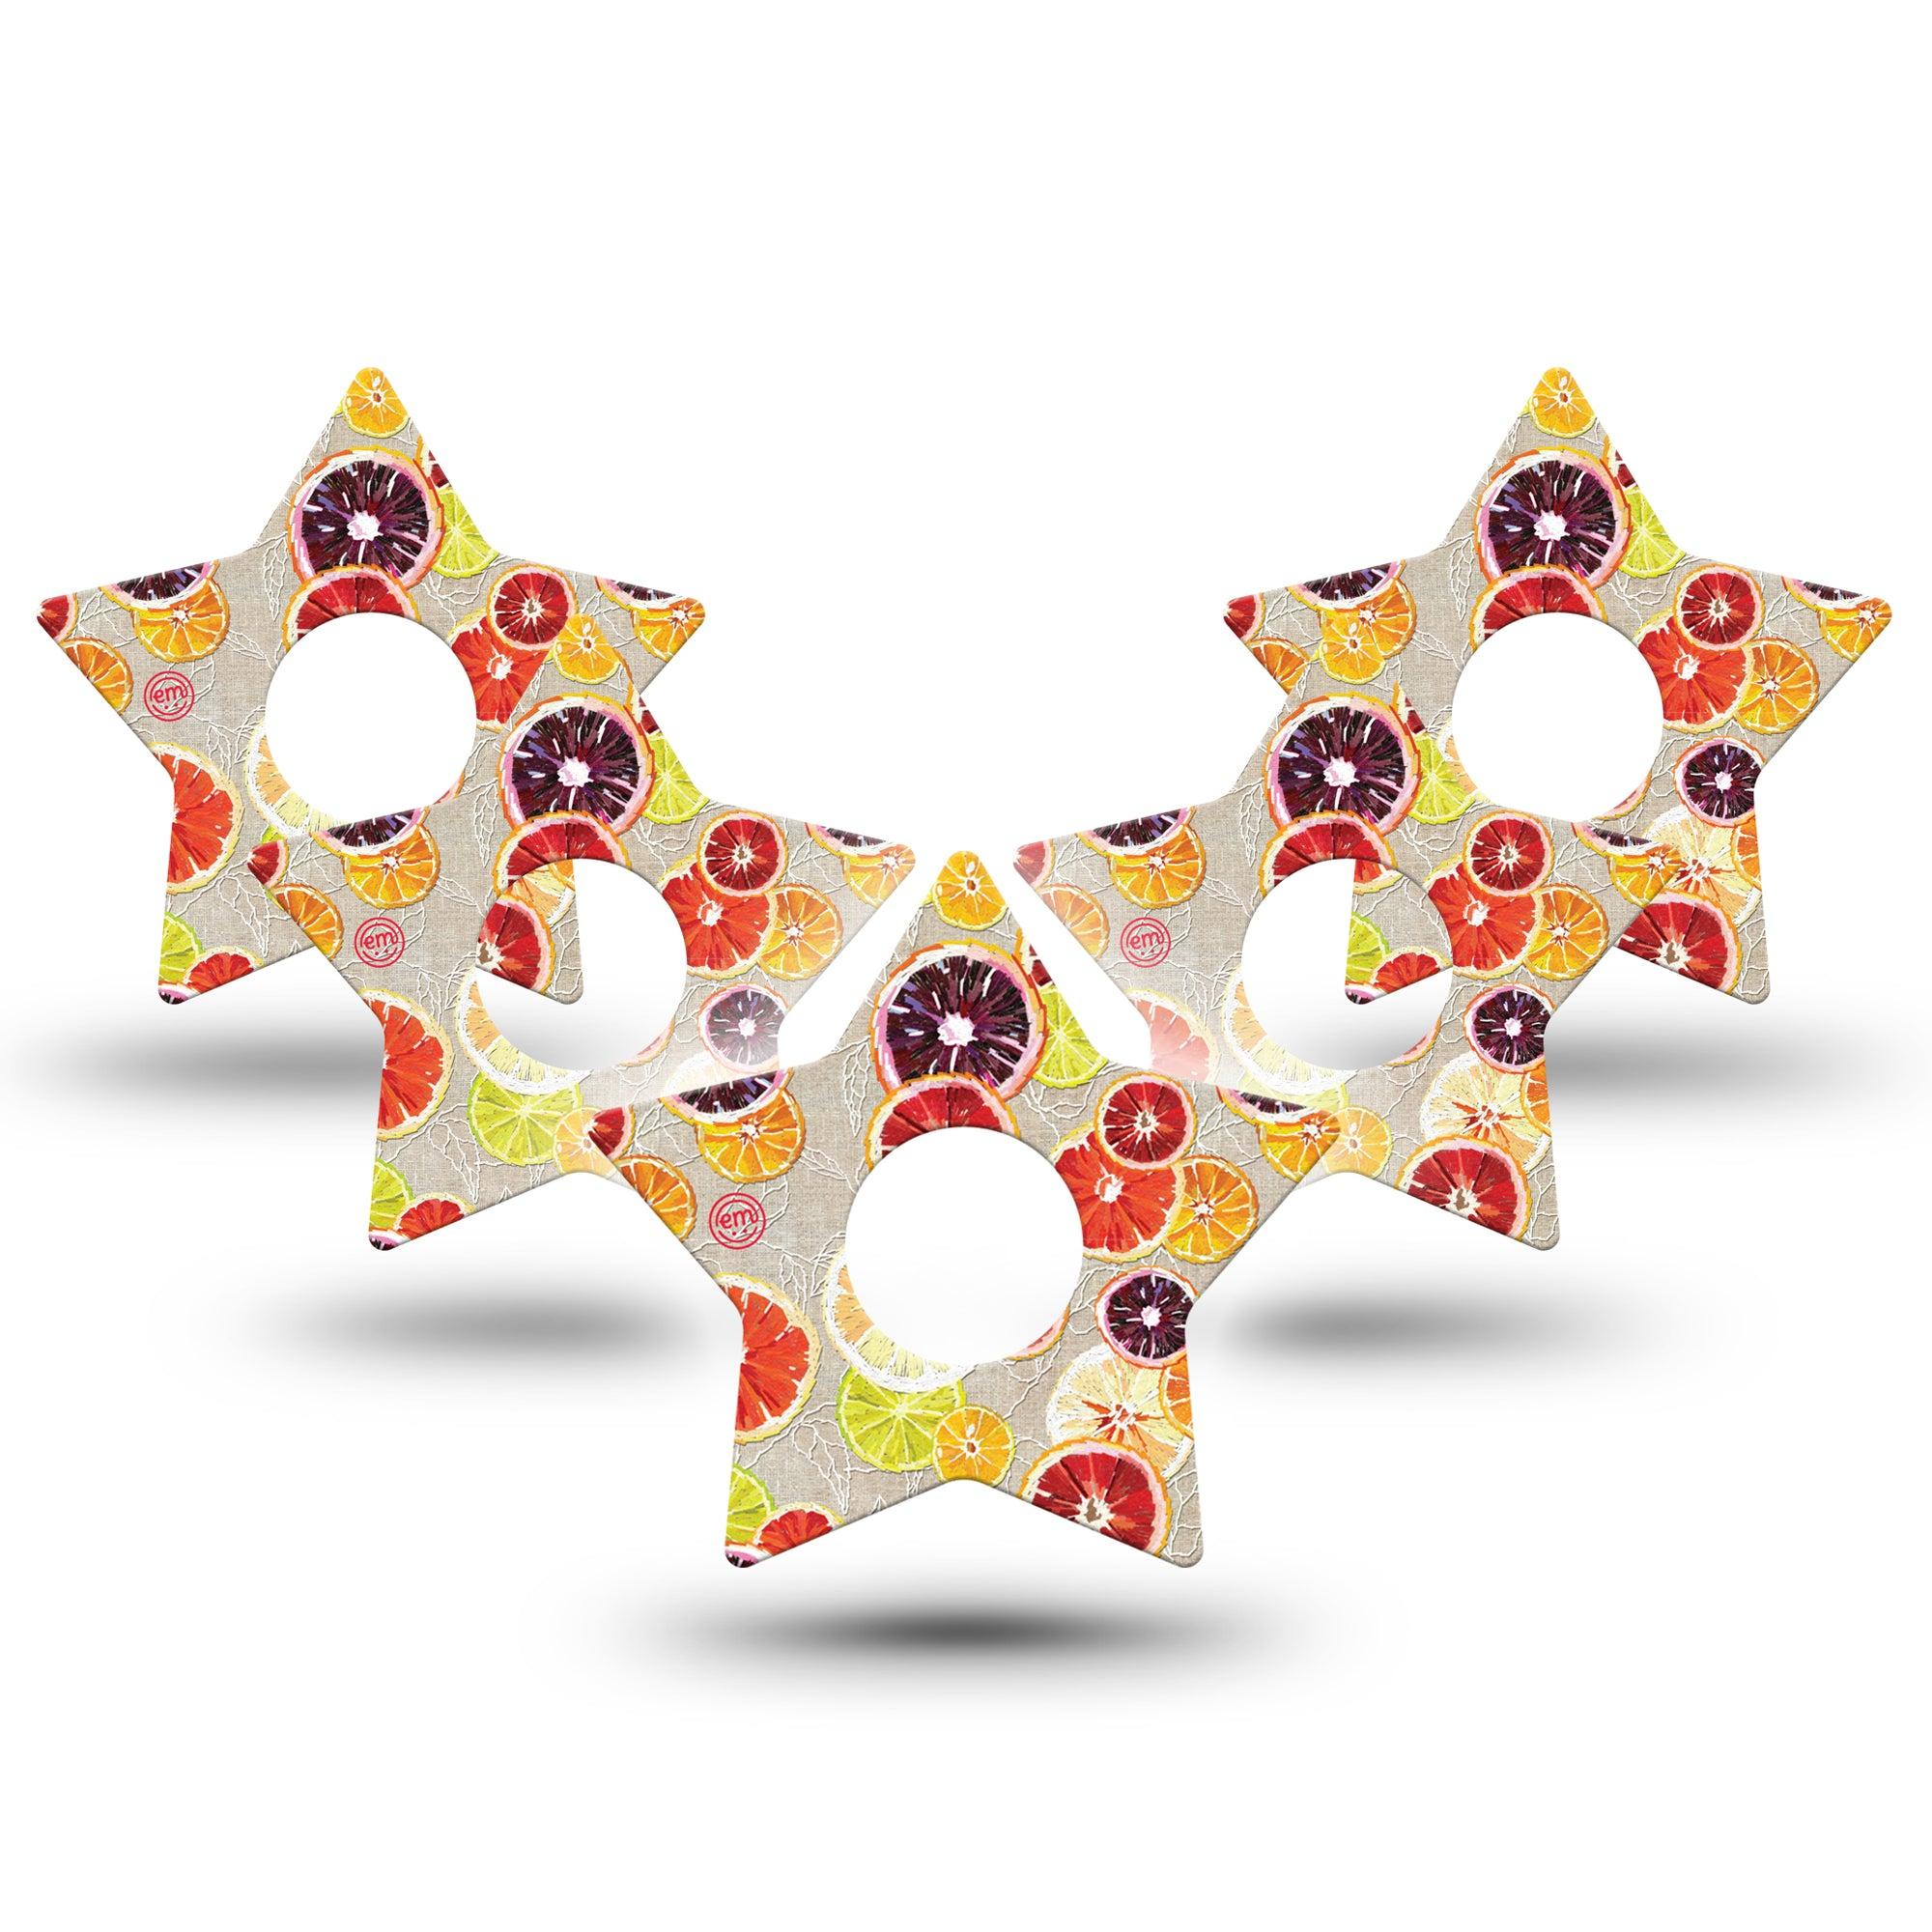 ExpressionMed Citrus Slices Star Libre 3 Tape, 5-Pack, Sweet Tangy Fruit Themed, CGM Overlay Patch Design